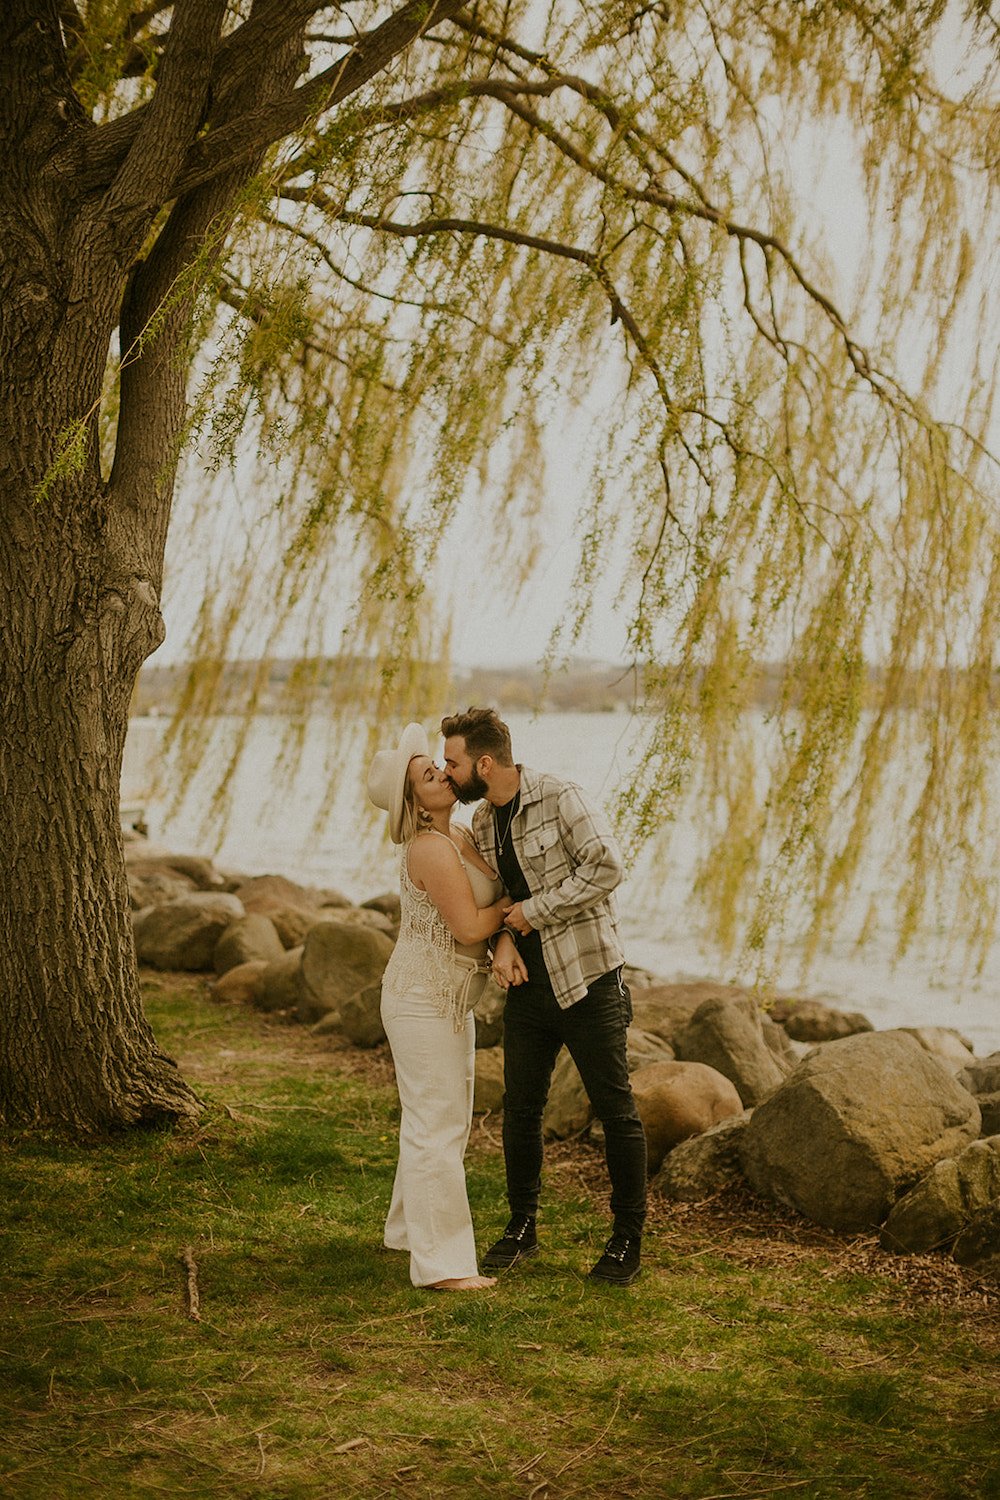 Couple stealing a kiss under the willow tree infront of the lake.